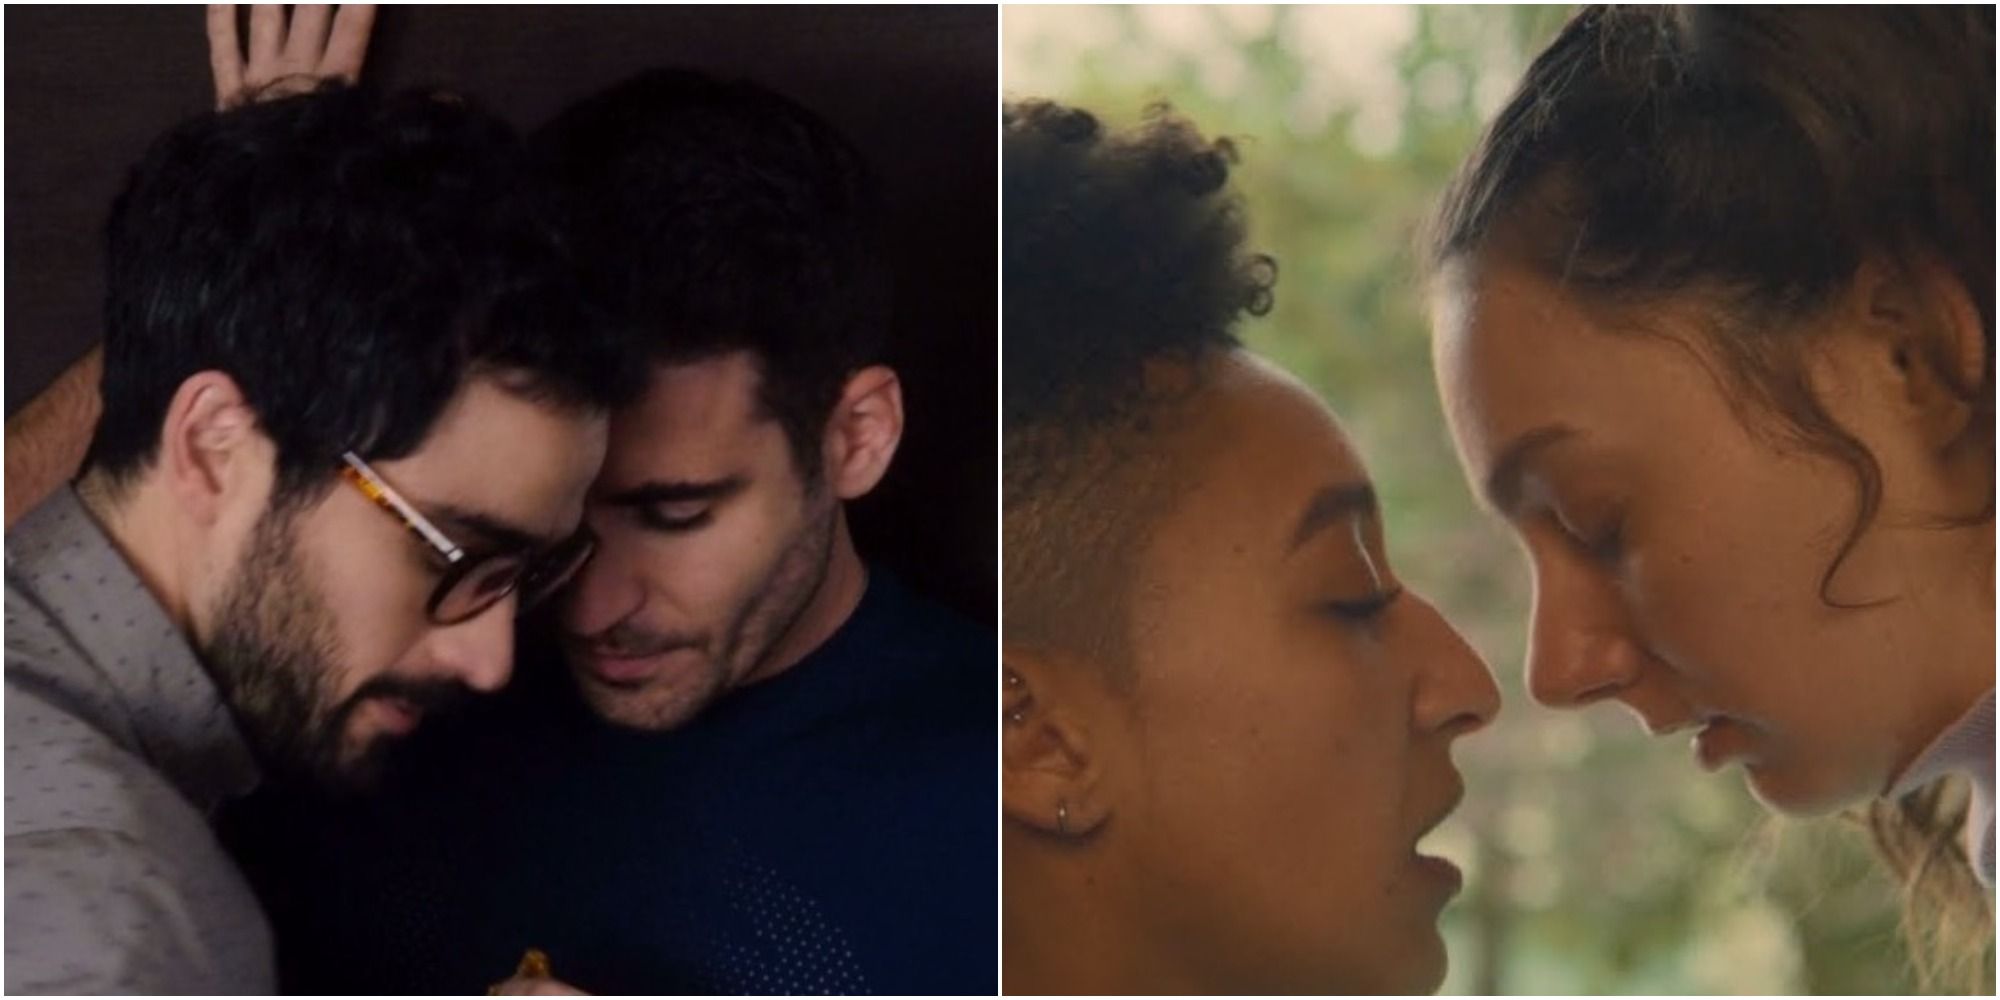 Split Image showing Lito, Hernando, Ola, and Lily